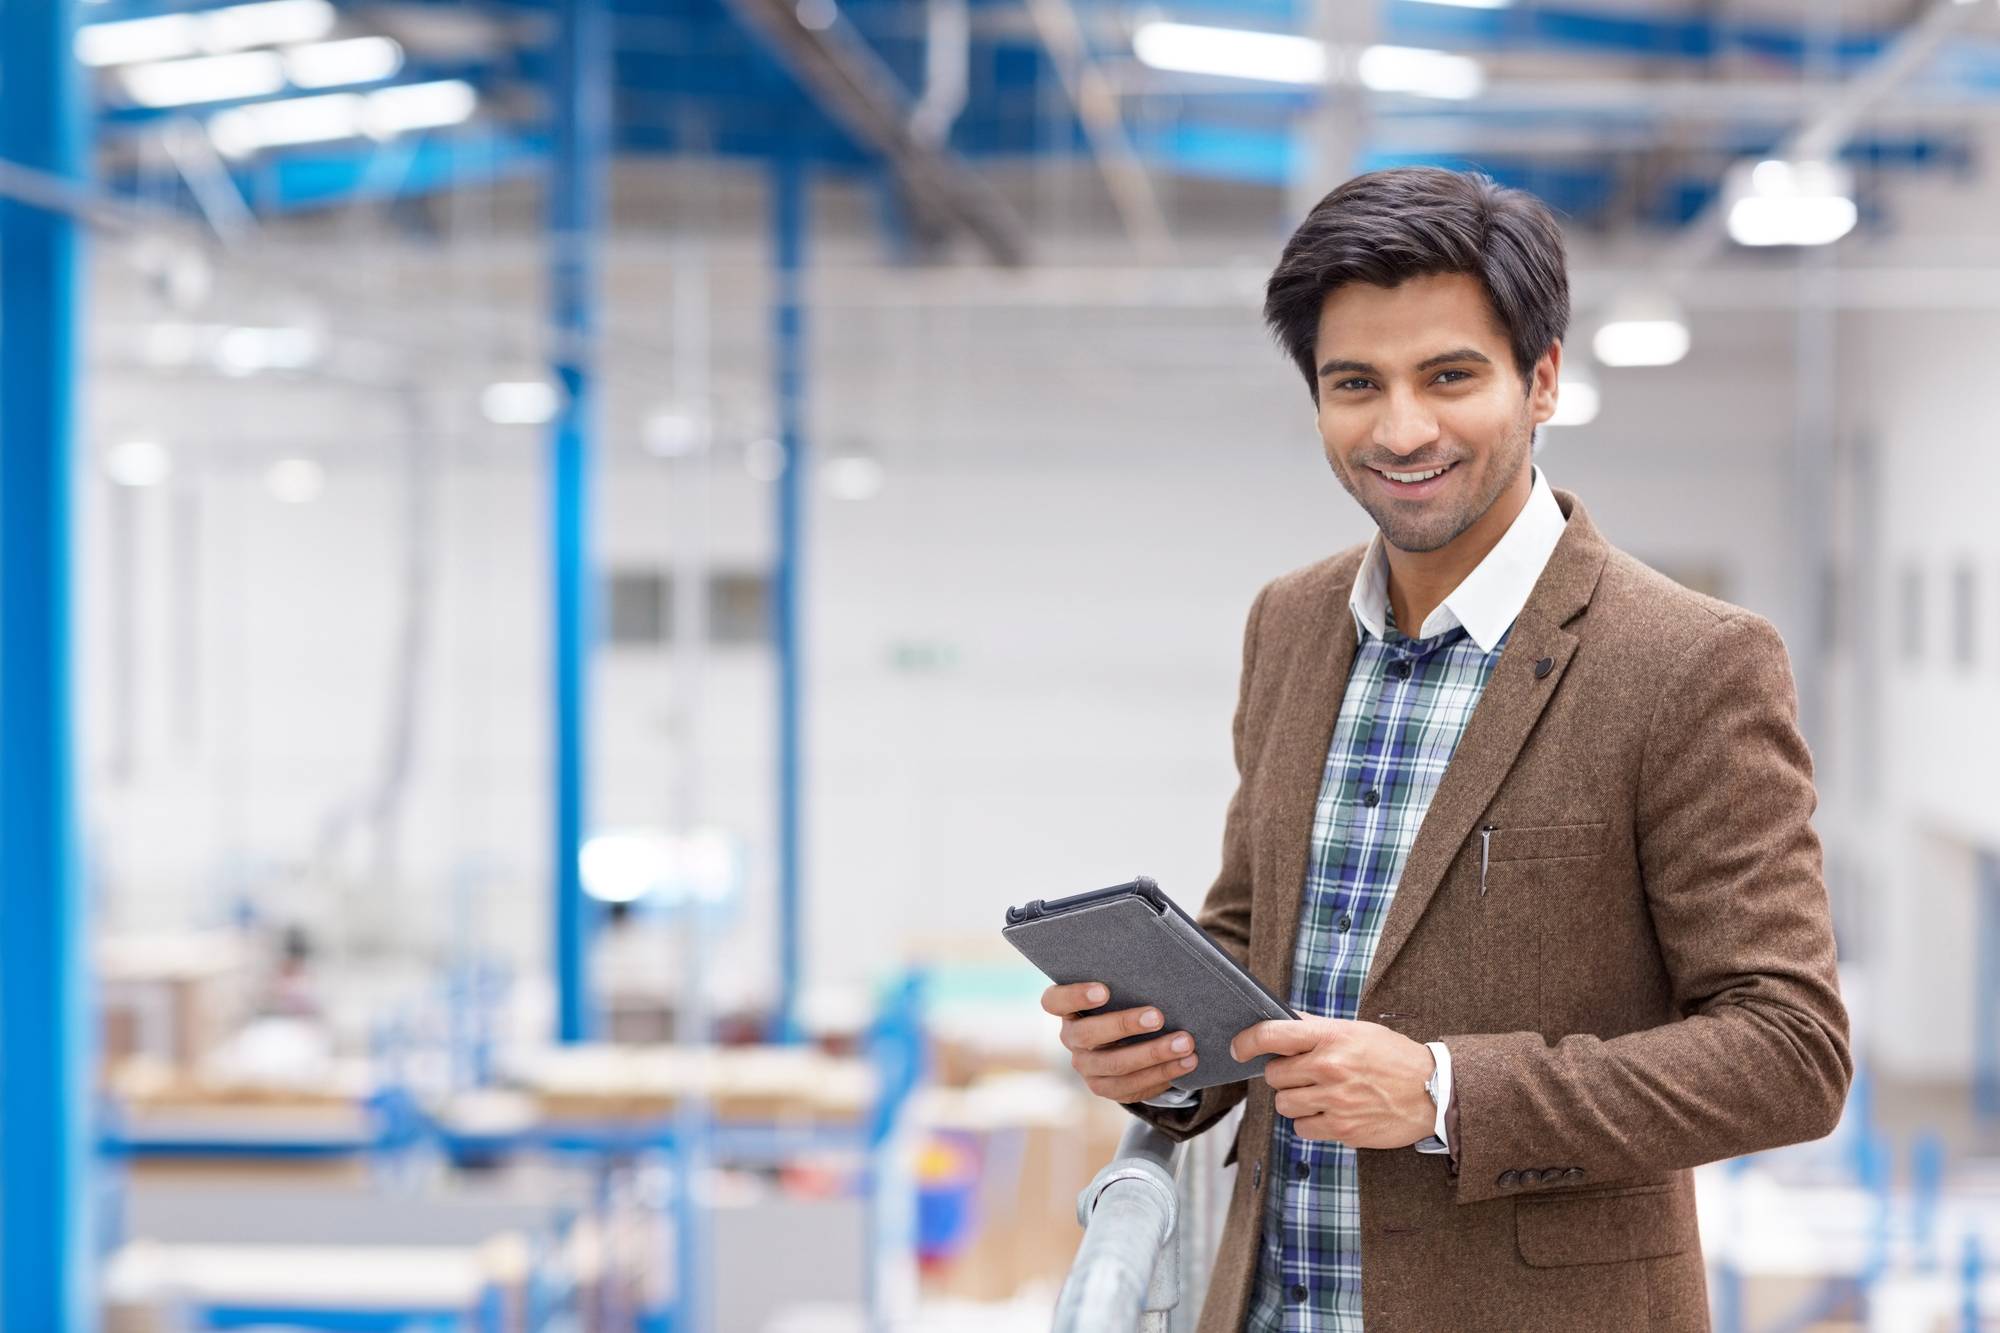 Smiling businessman with a tablet in a modern manufacturing plant.